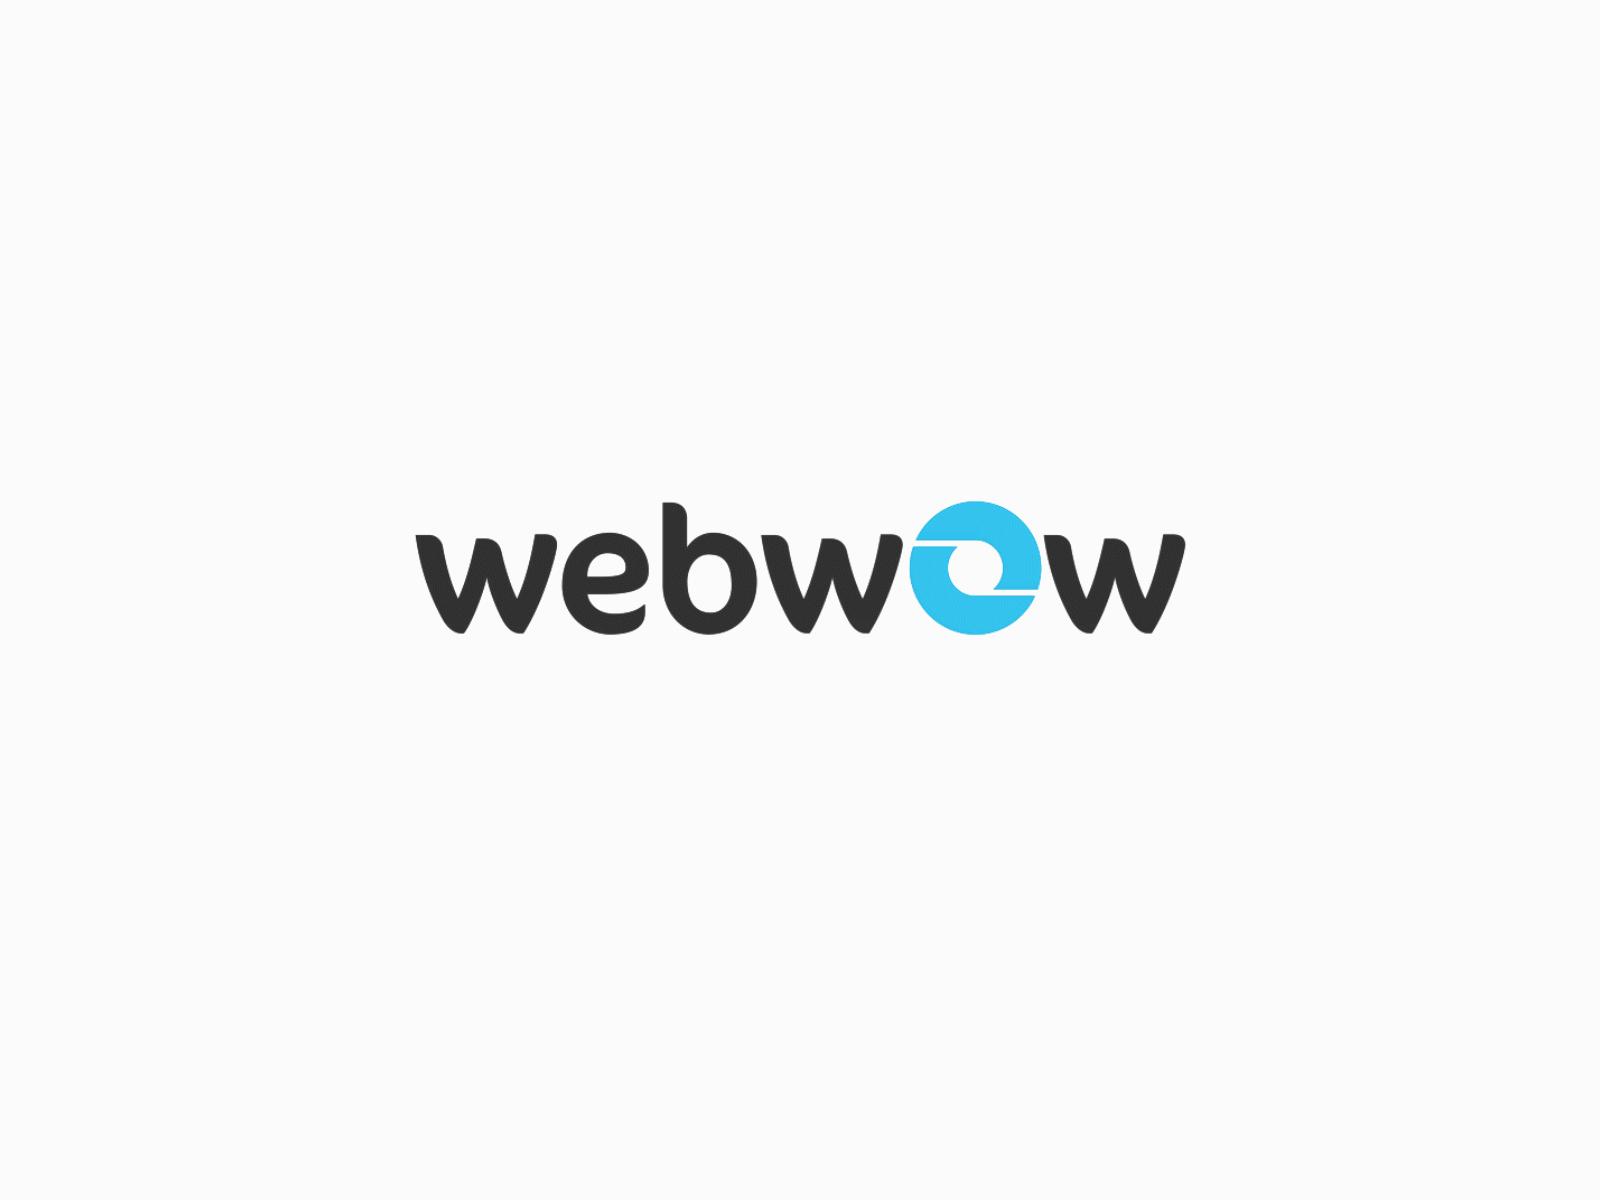 Webwow Recent Project Logo animation